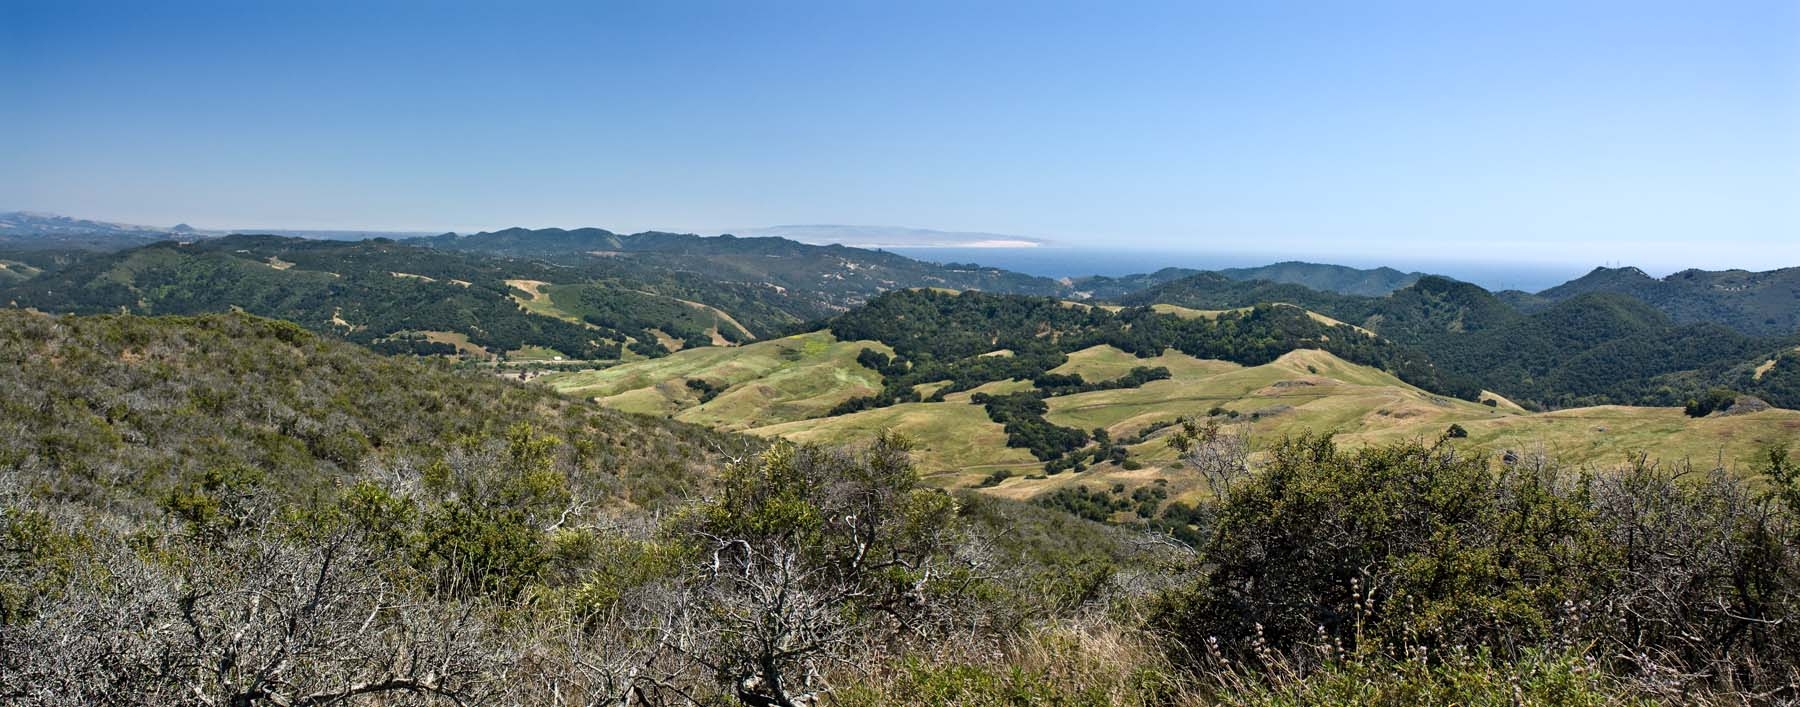 Panoramic view from the Froom Trail in San Luis Obispo